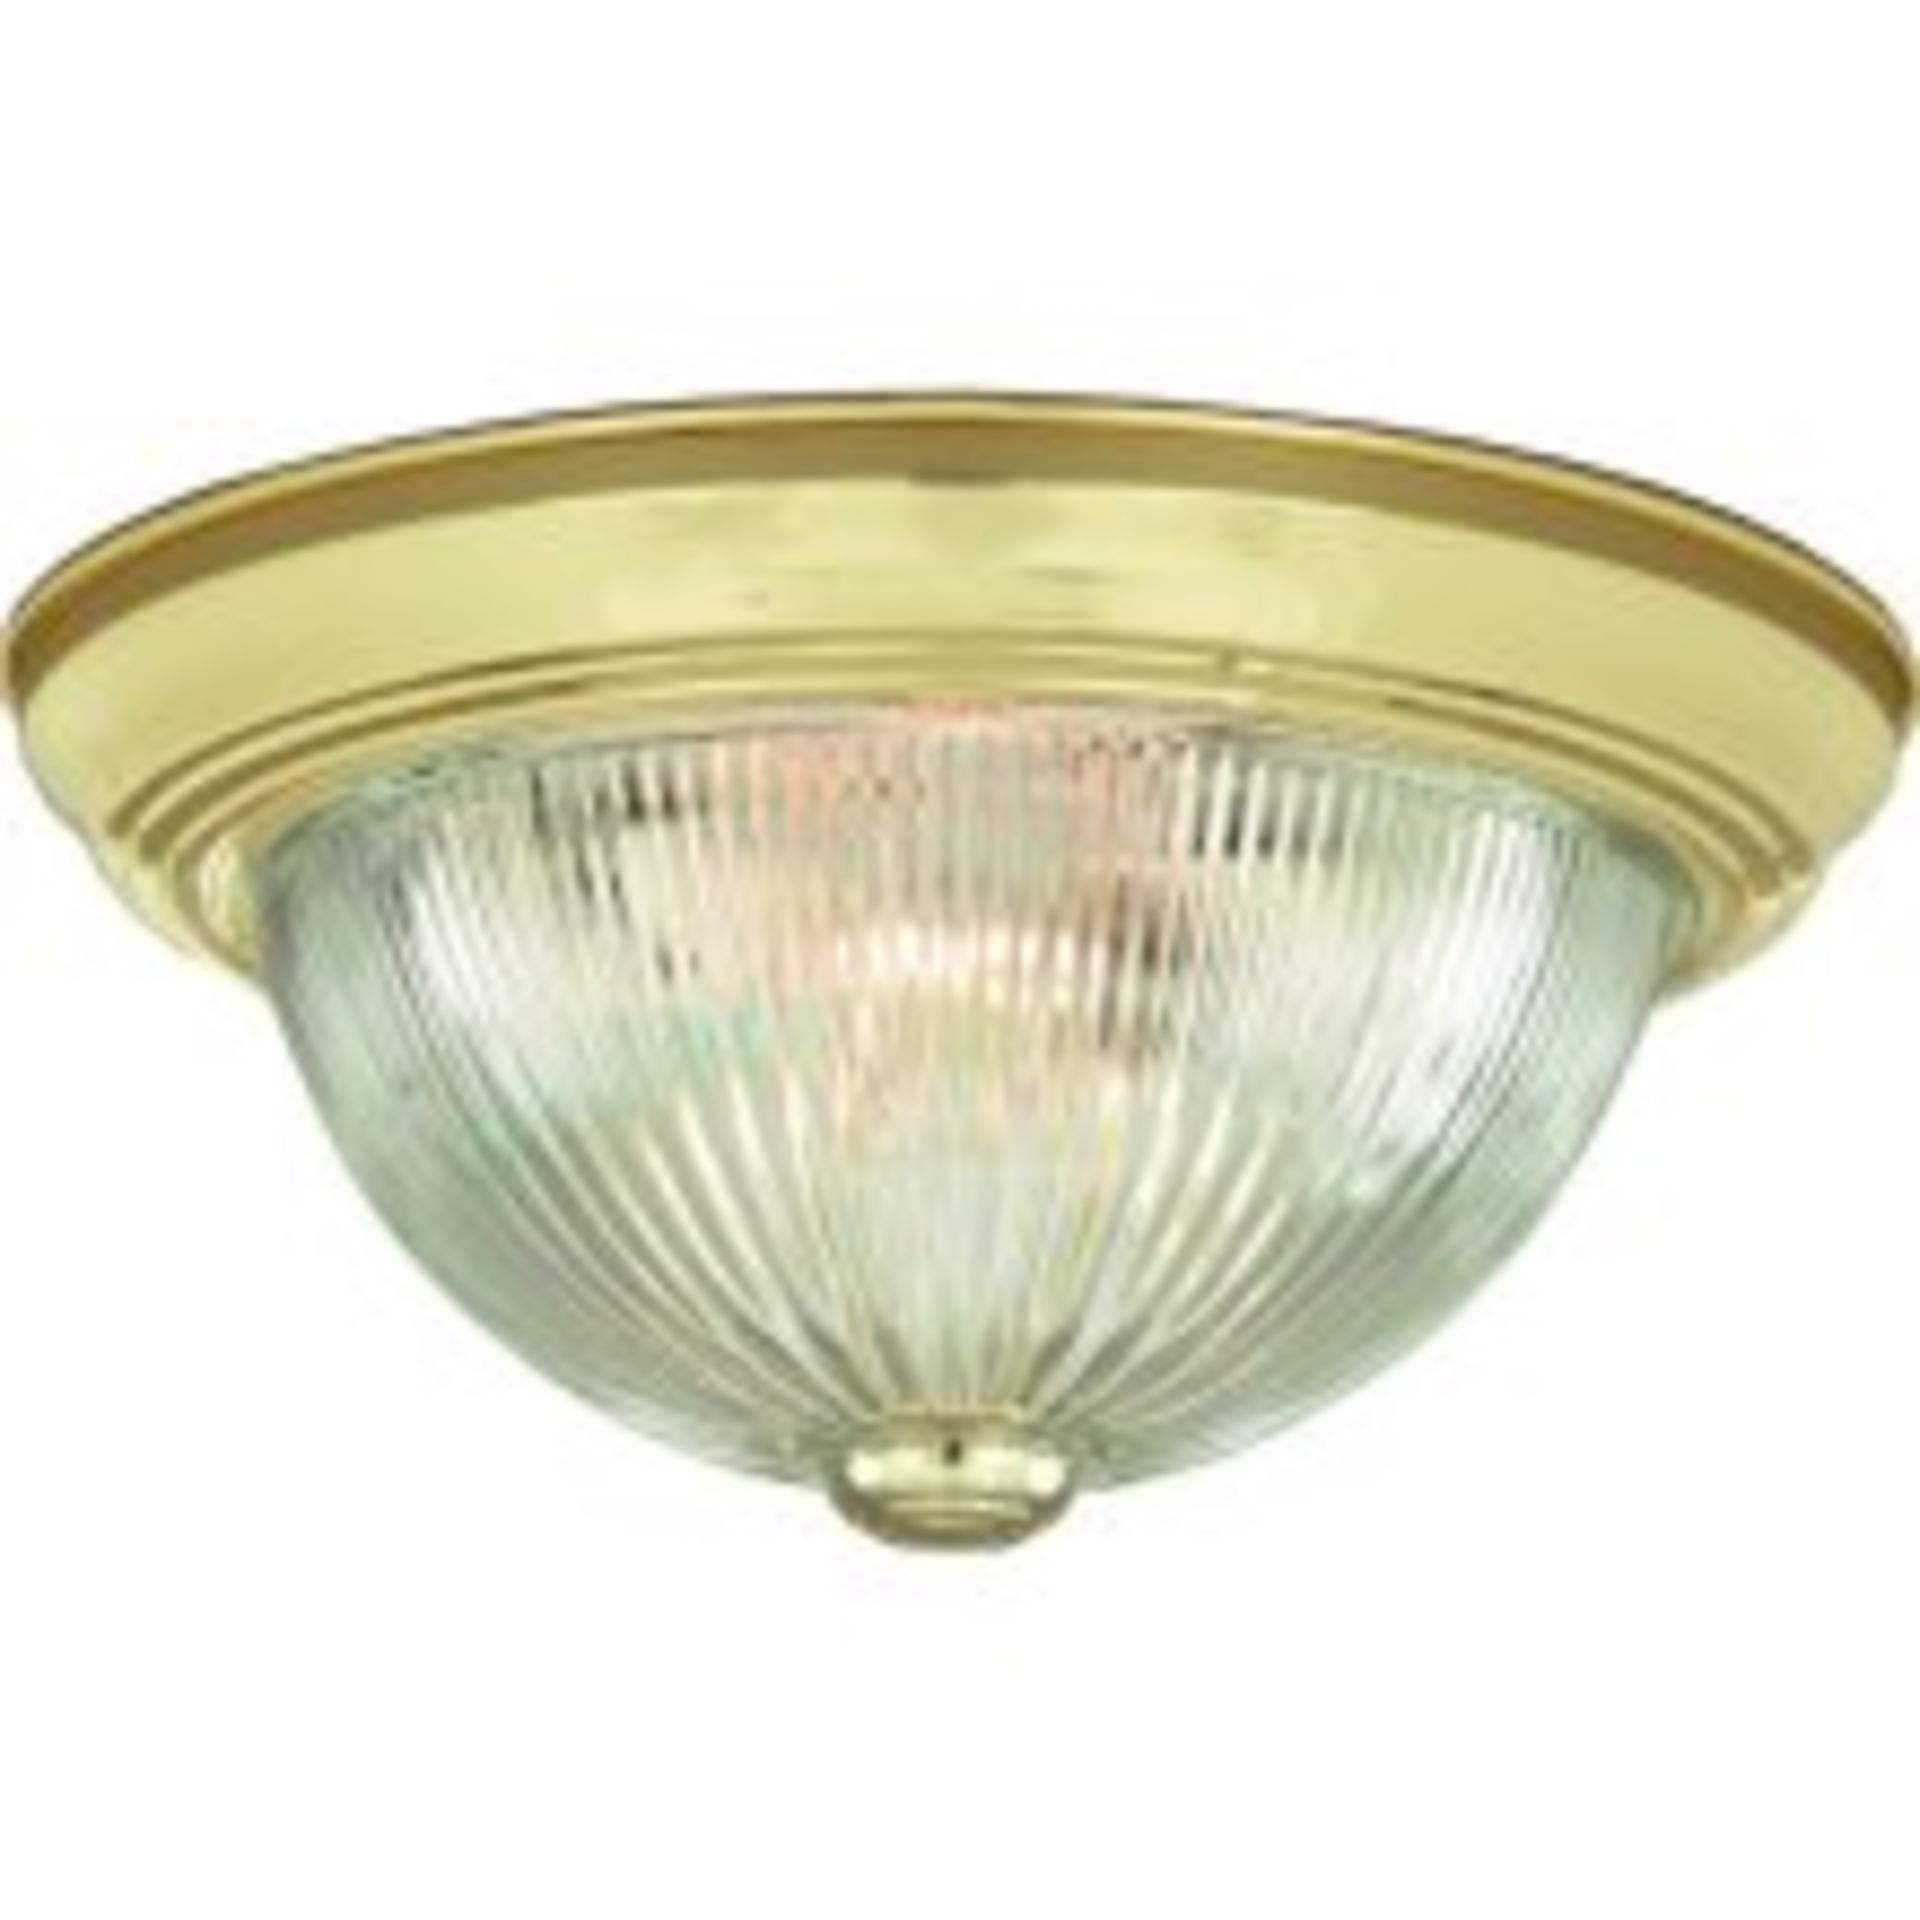 SAVOY HOUSE 1188-PB TRADITIONAL / CLASSIC FLUSHMOUNT CEILING FIXTURE,  11W INCHES, TWO 40-WATT